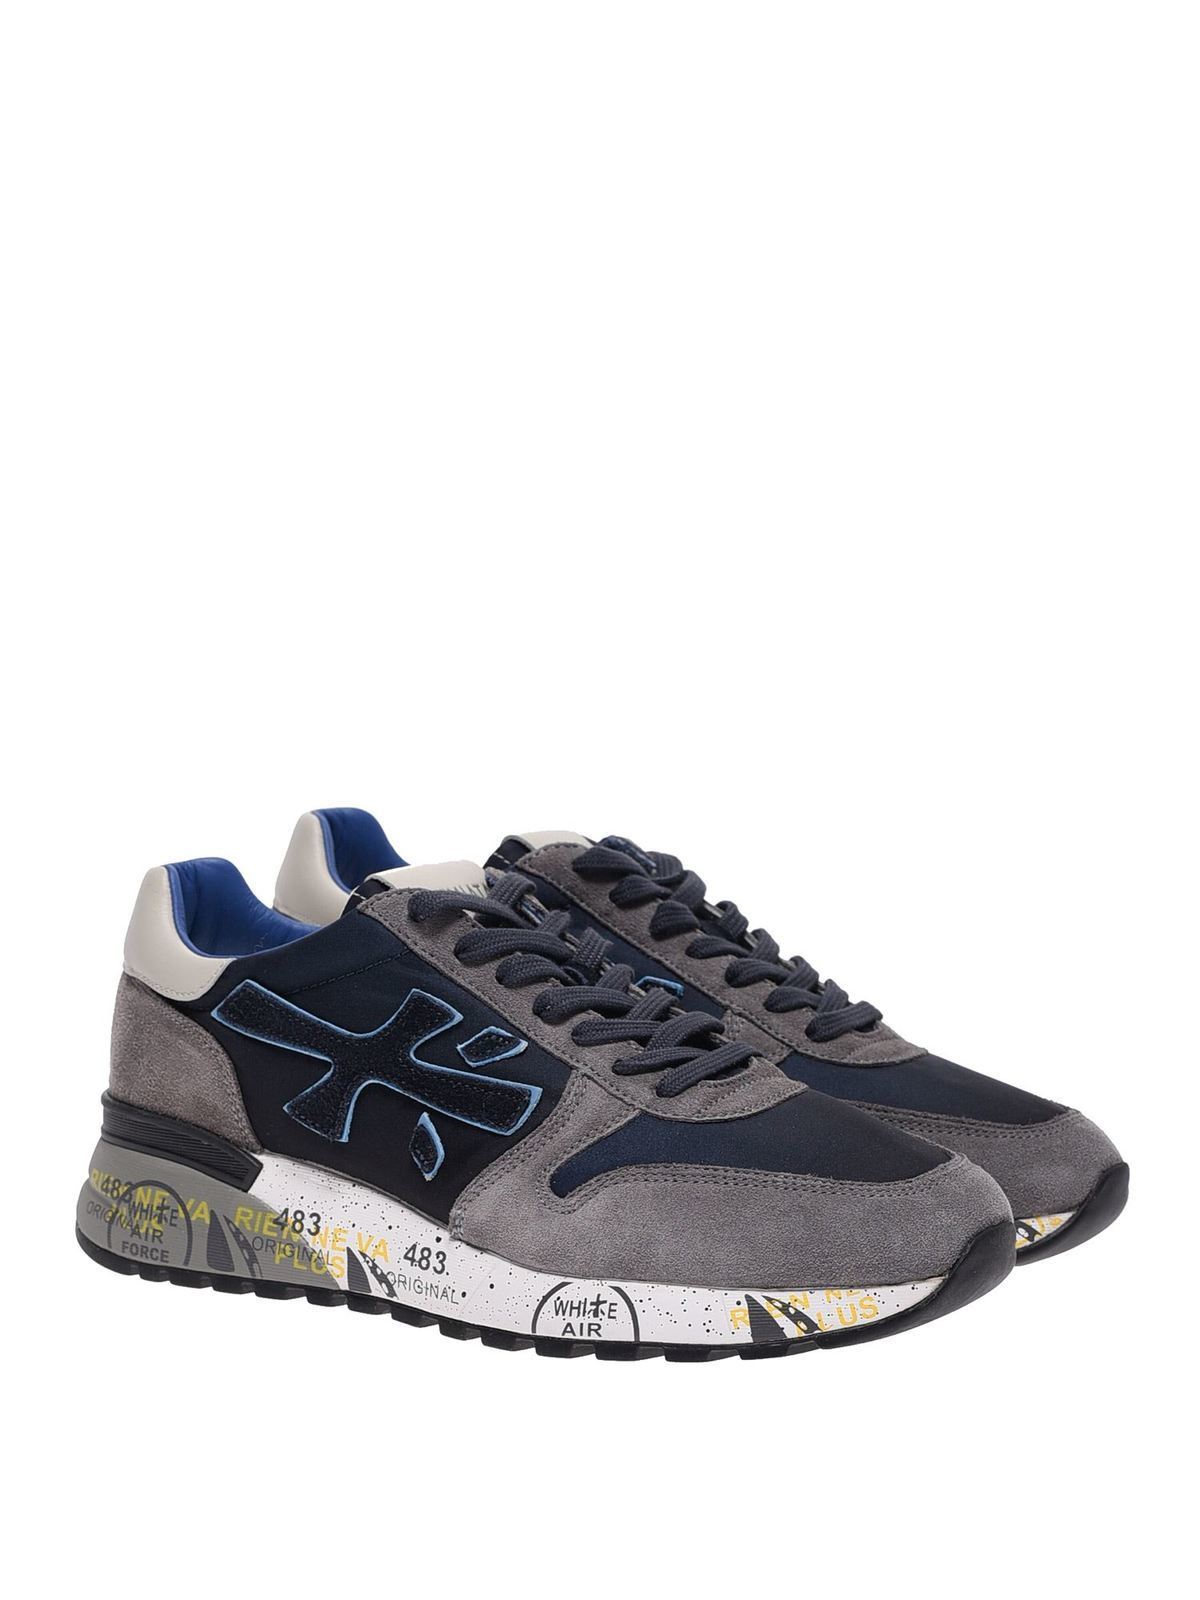 Trainers Premiata - Mick sneakers in blue and grey - MICK5357 | iKRIX.com